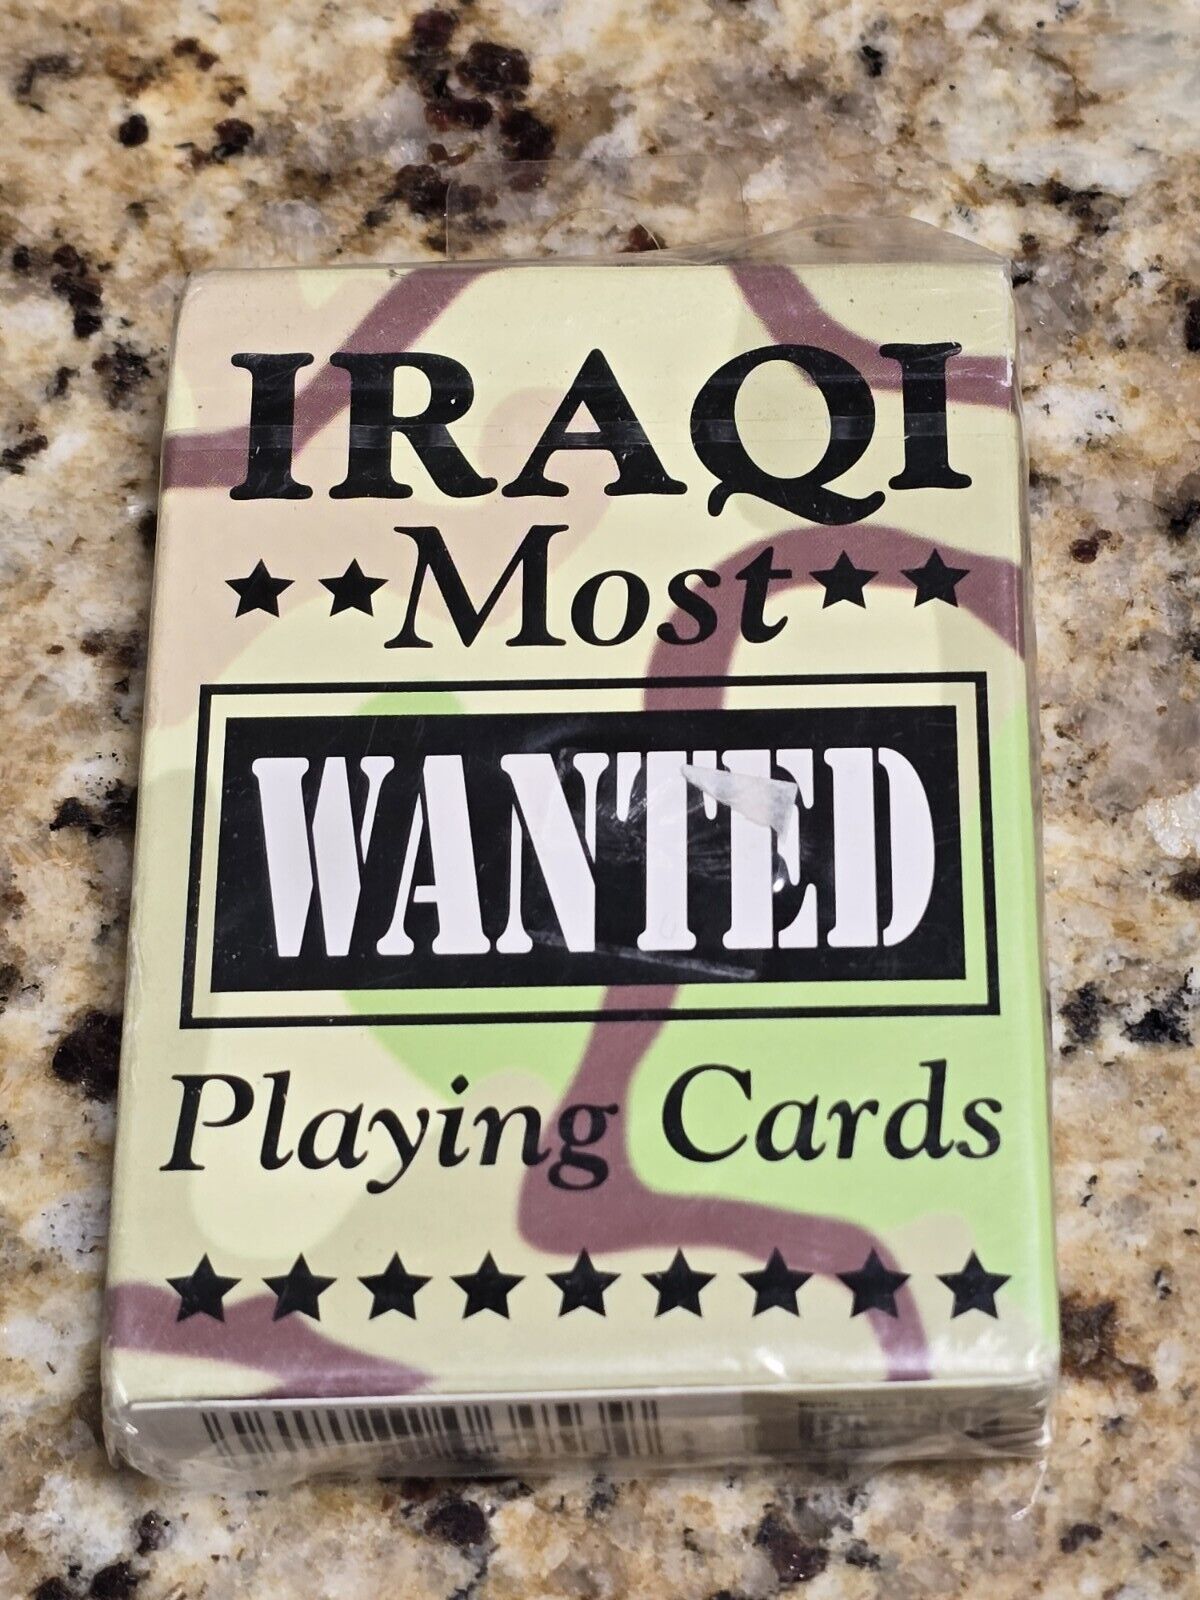 Iraqi Most Wanted Playing Cards Deck Original Unopened Bicycle Iraq War - Sealed